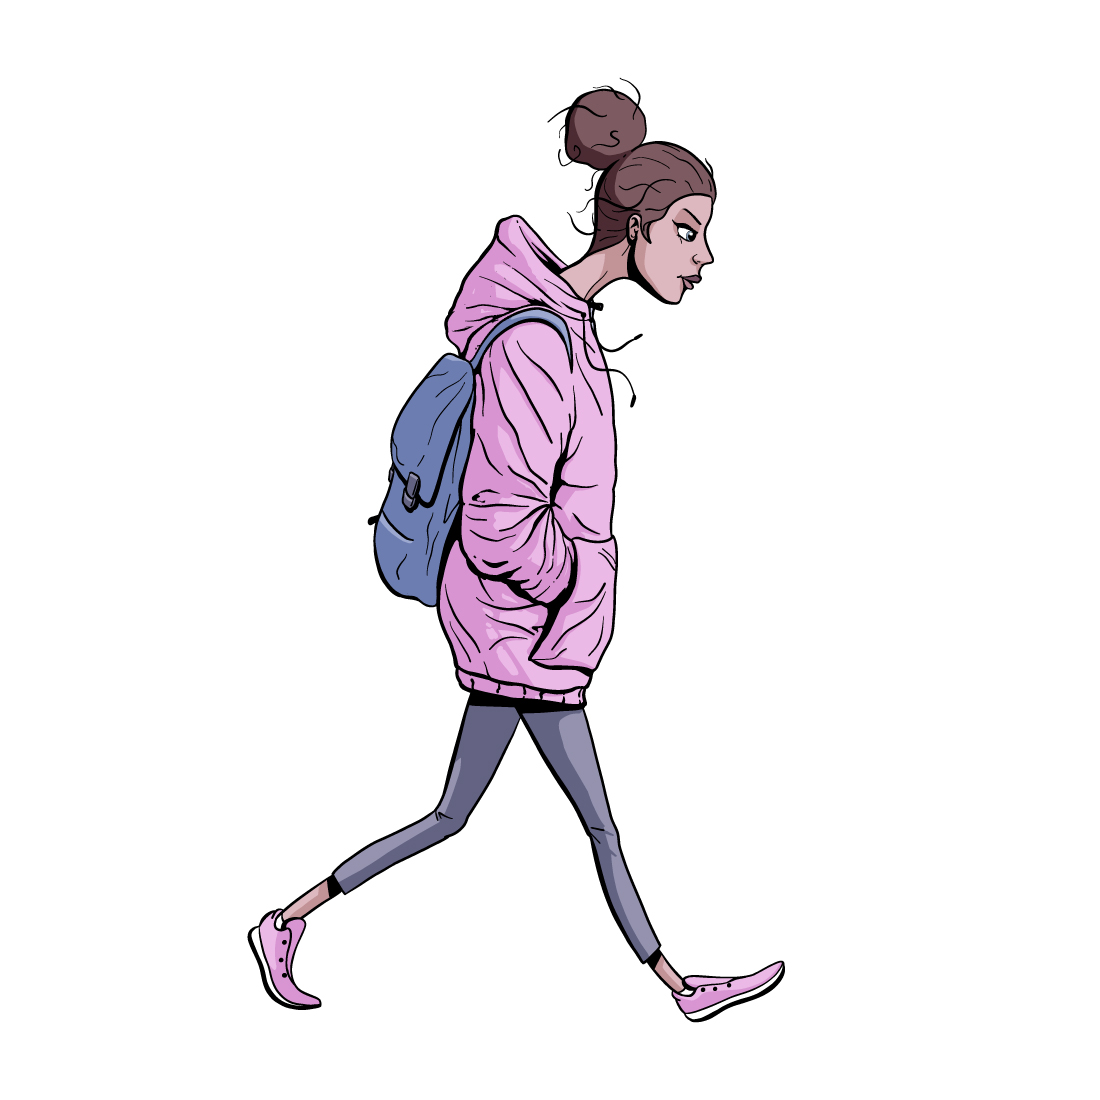 Cartoon girl with backpack and oversized hoodie walking preview image.